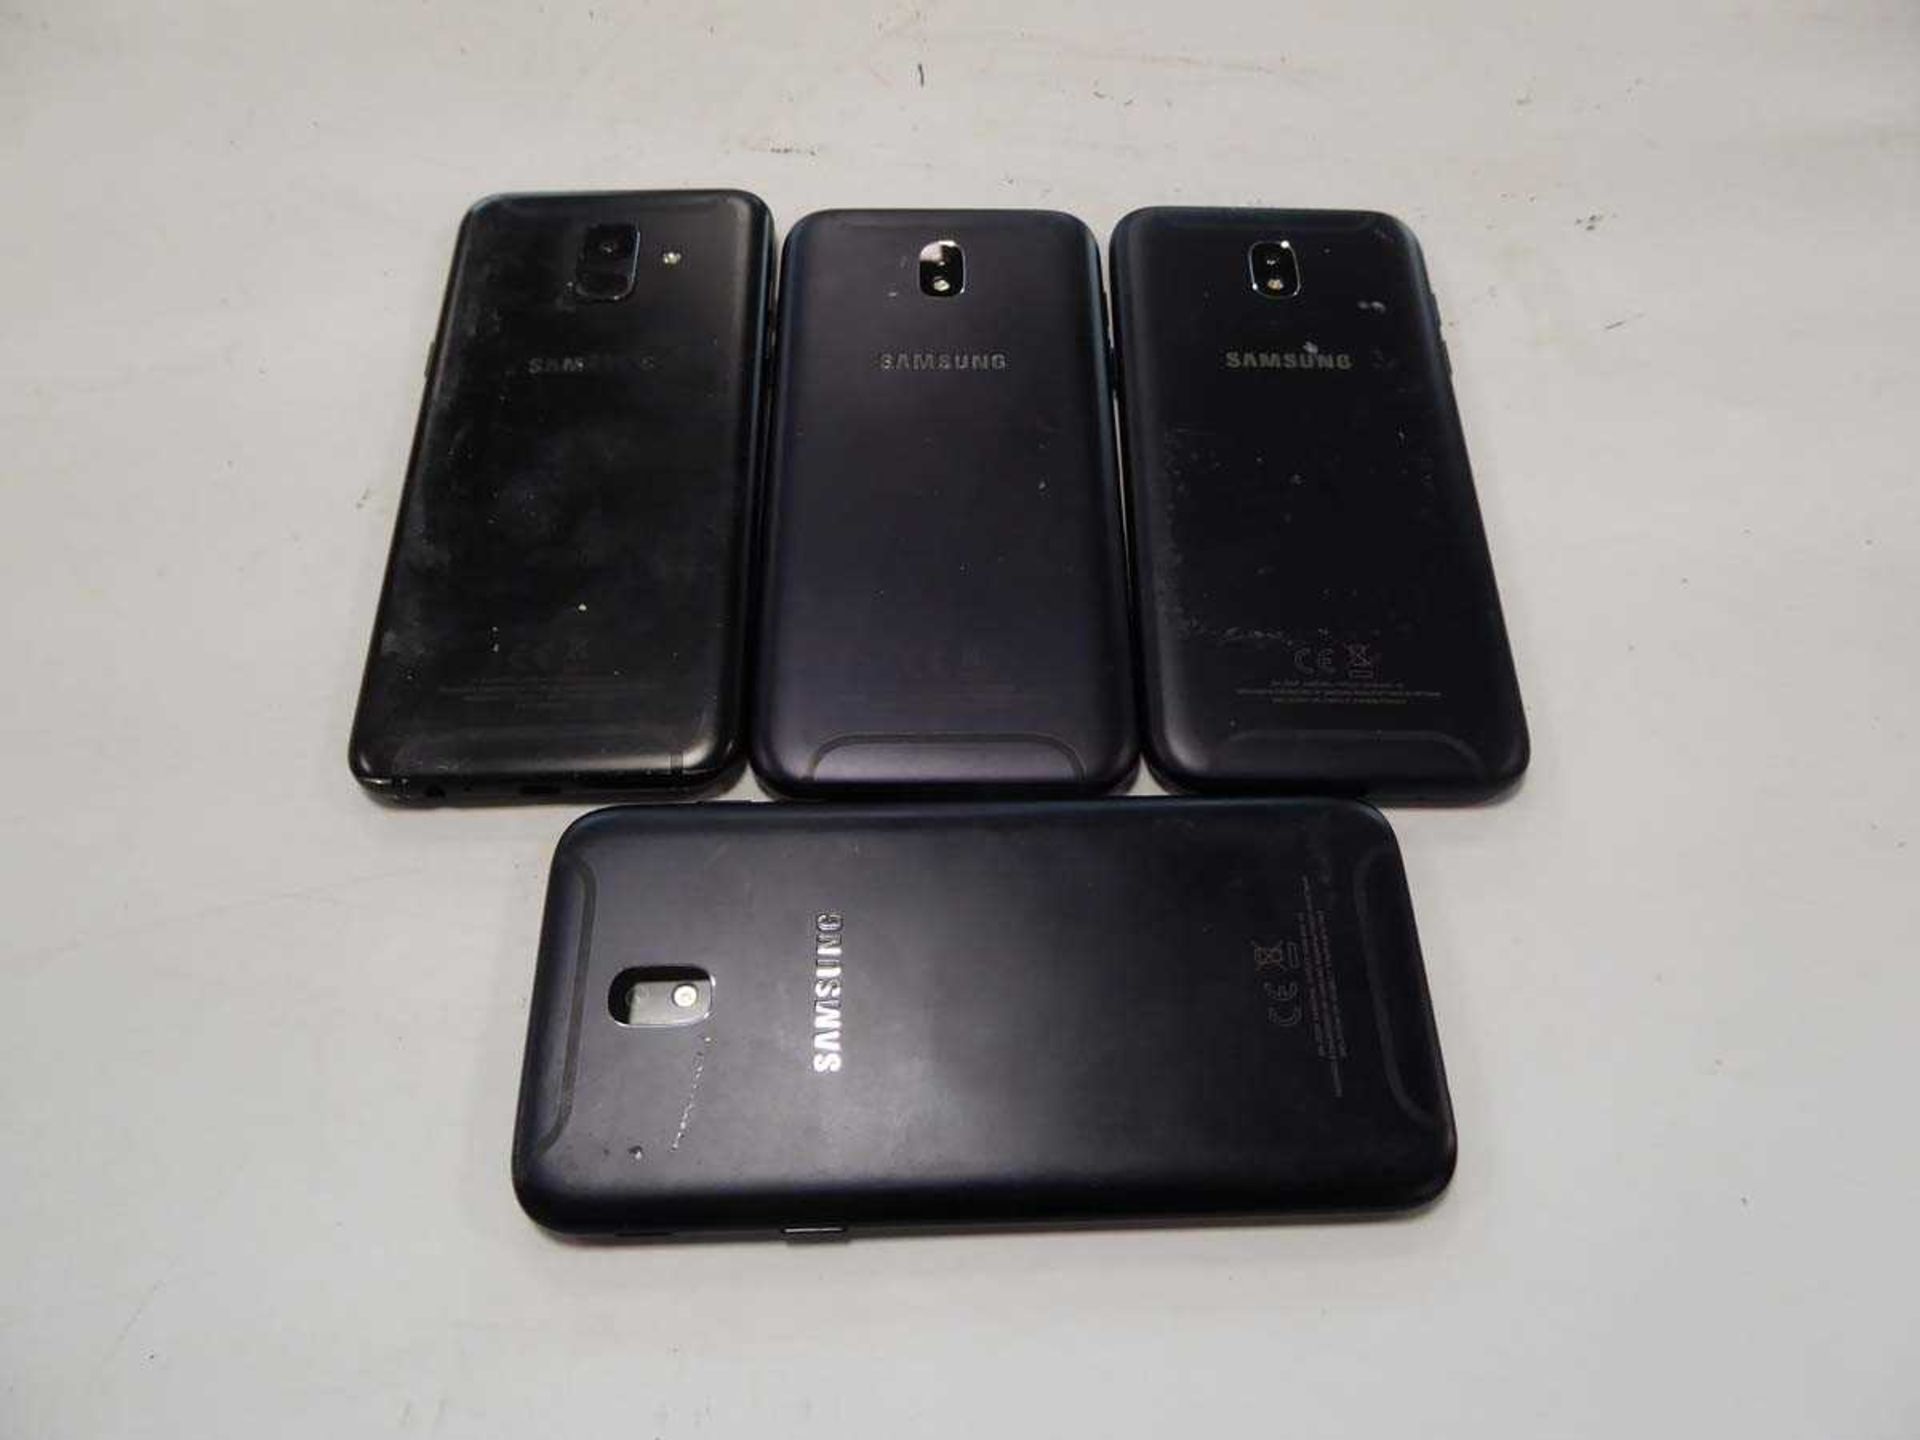 4 Samsung mobile phones - Image 2 of 2